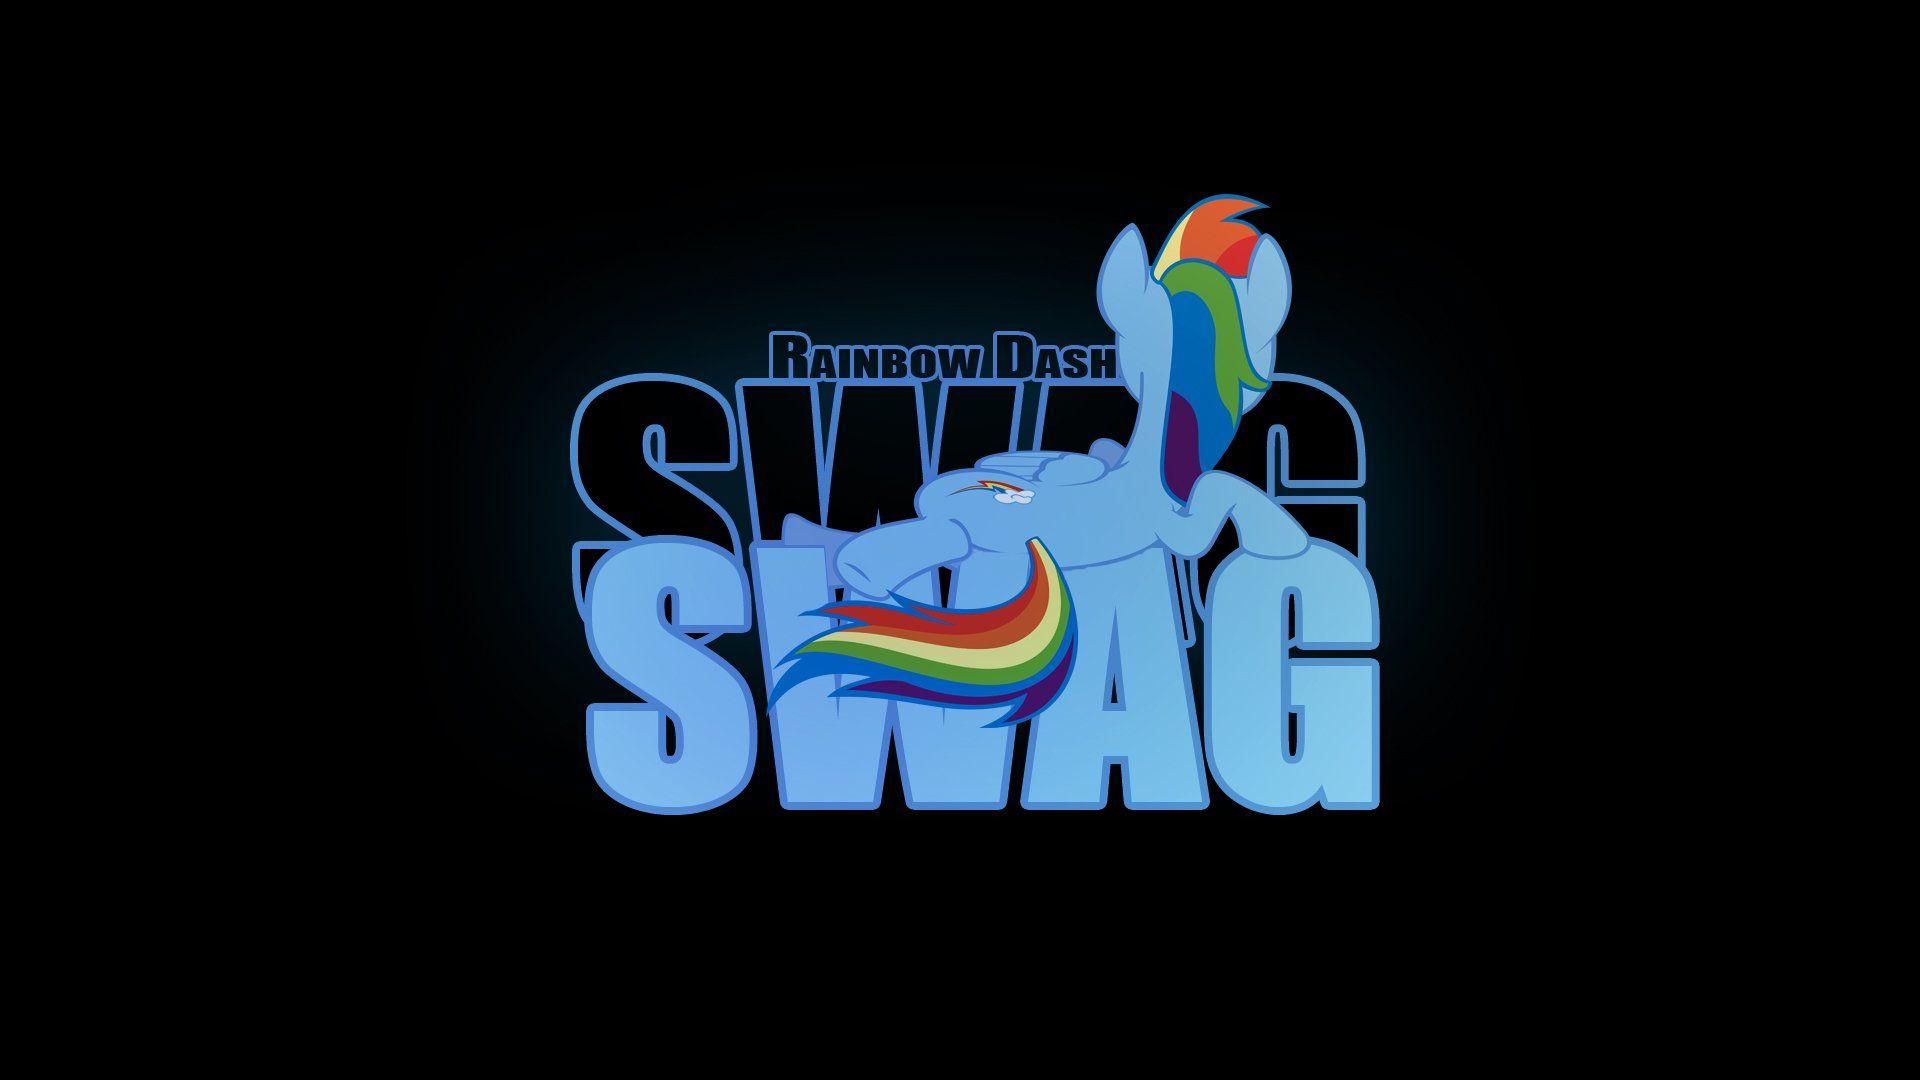 Swag HD Wallpaper and Background Image